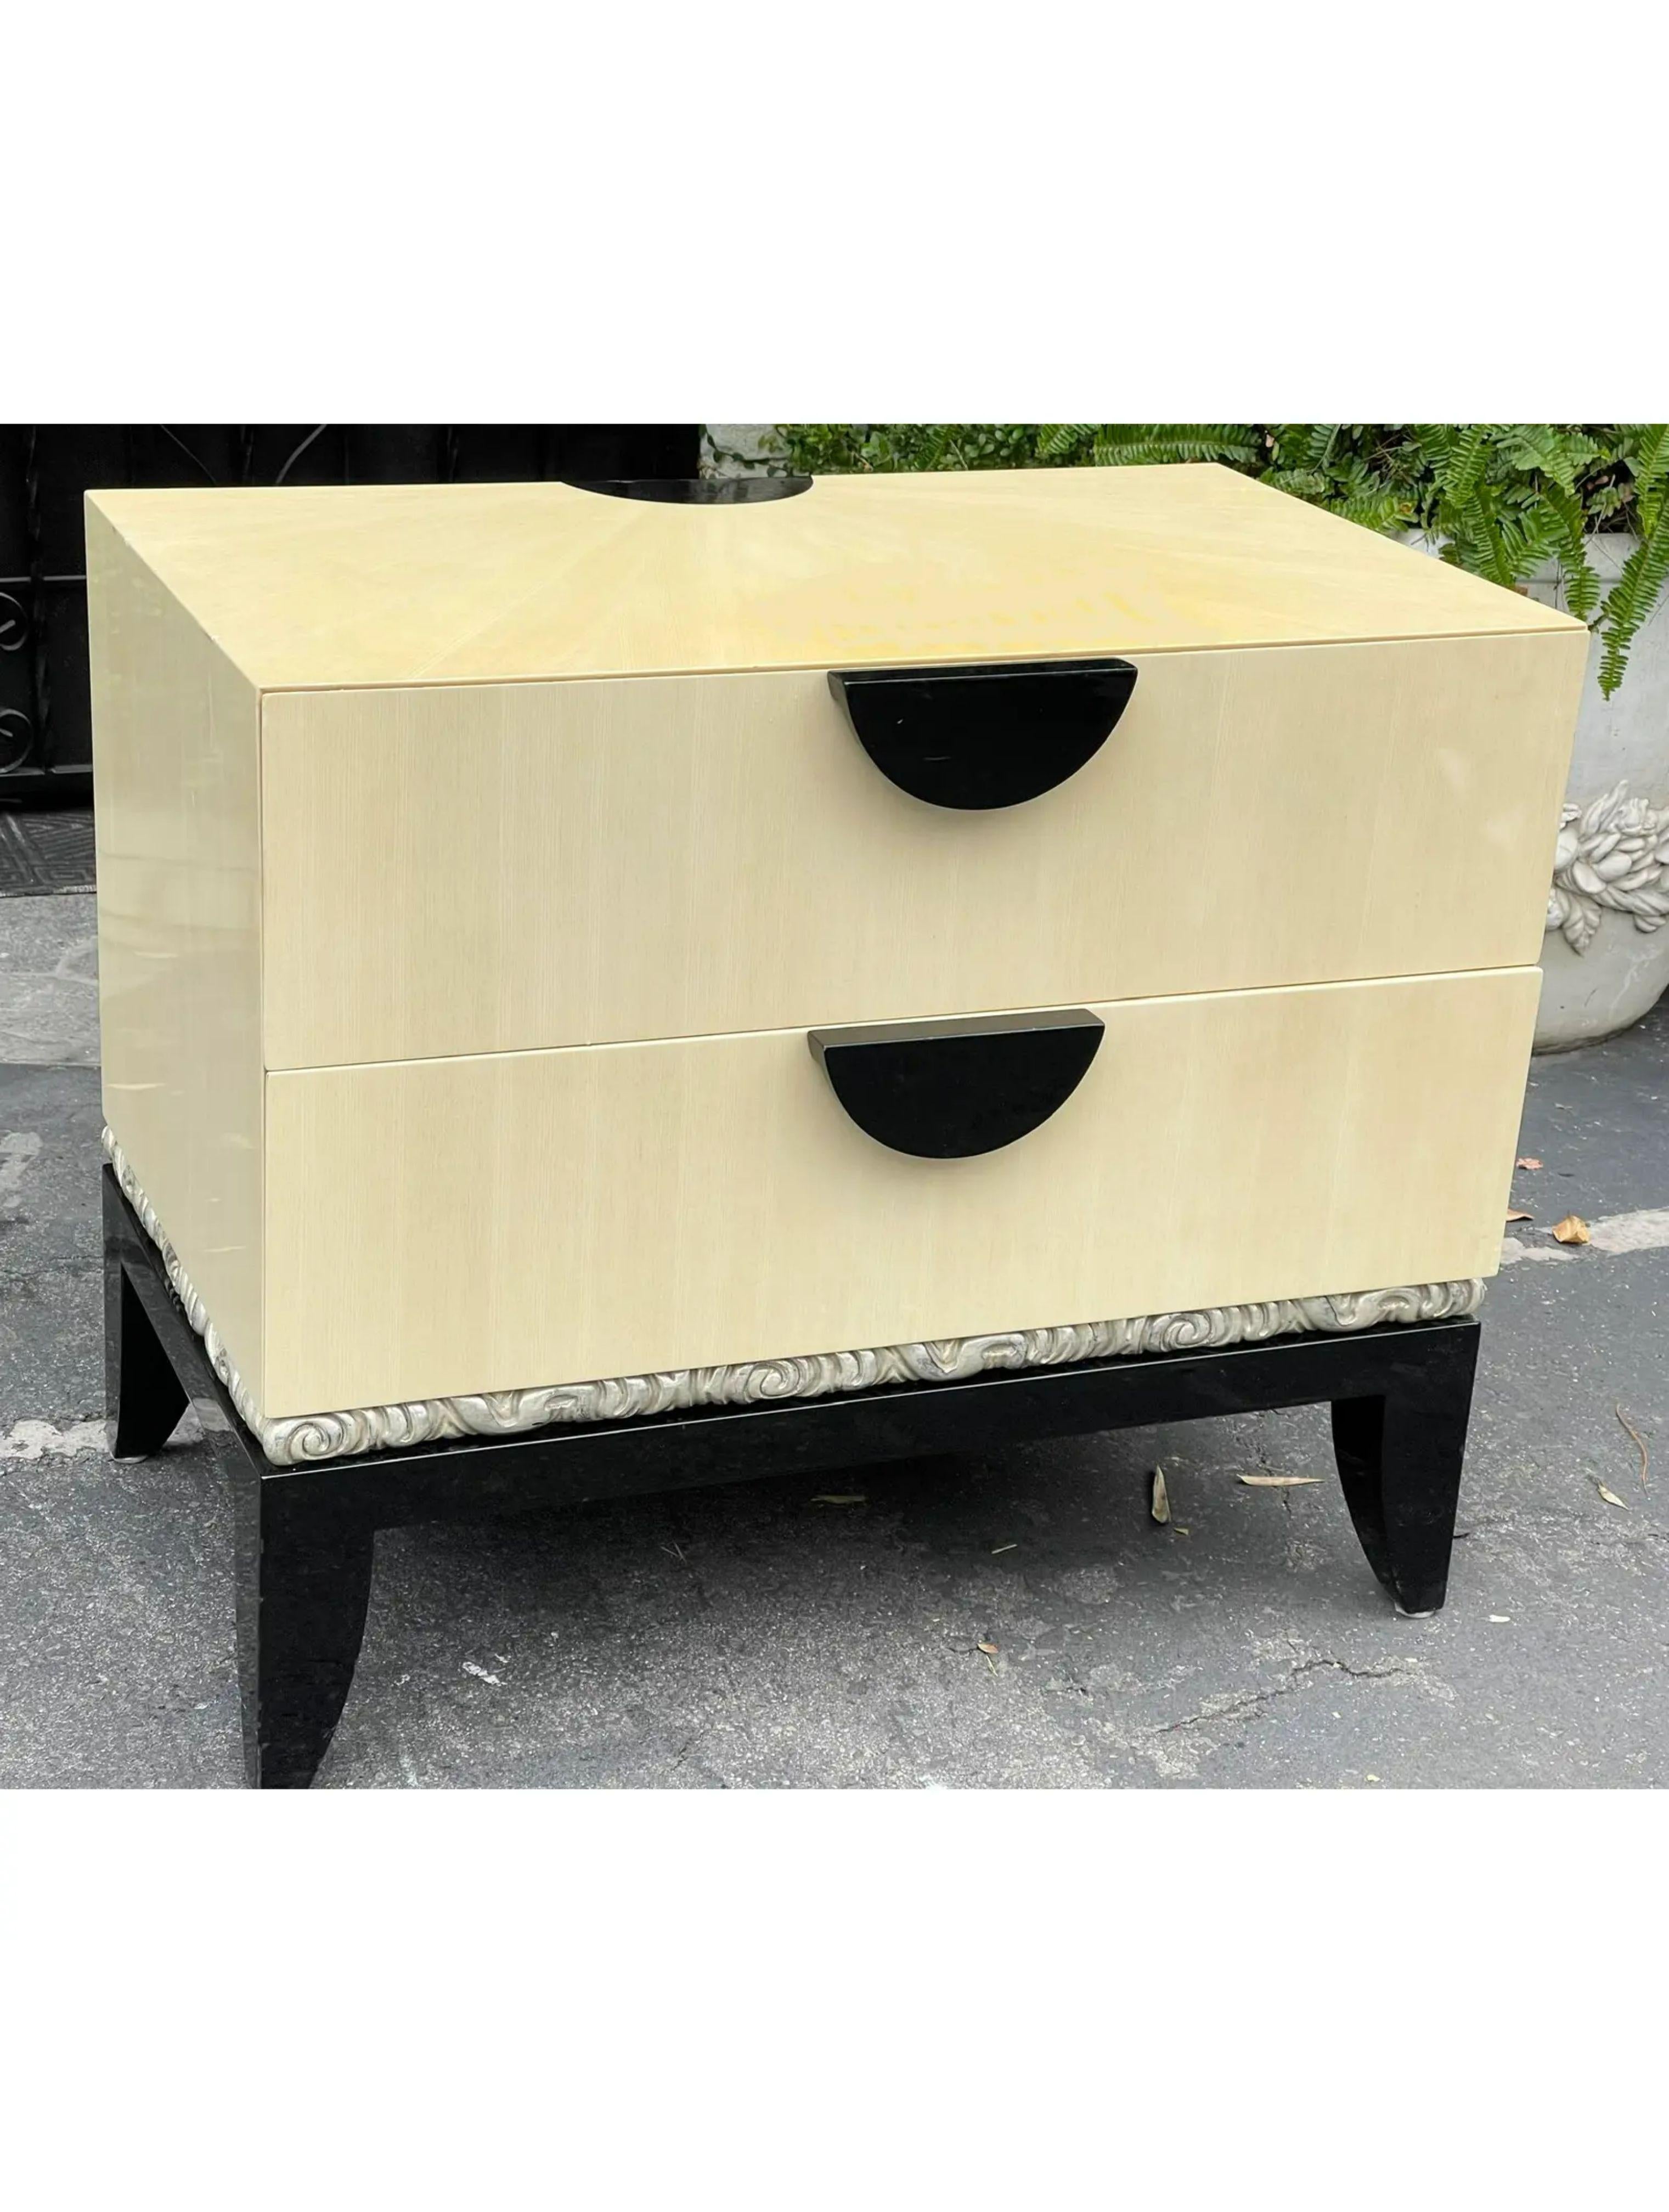 Art Deco Style J. Robert Scott 2 drawer Commode nightstand. It is a classic example designed by Sally Sirkin Lewis for J. Robert Scott.

Additional information: 
Materials: Ebony, Lacquer
Color: Ivory
Brand: J. Robert Scott
Designer: Sally